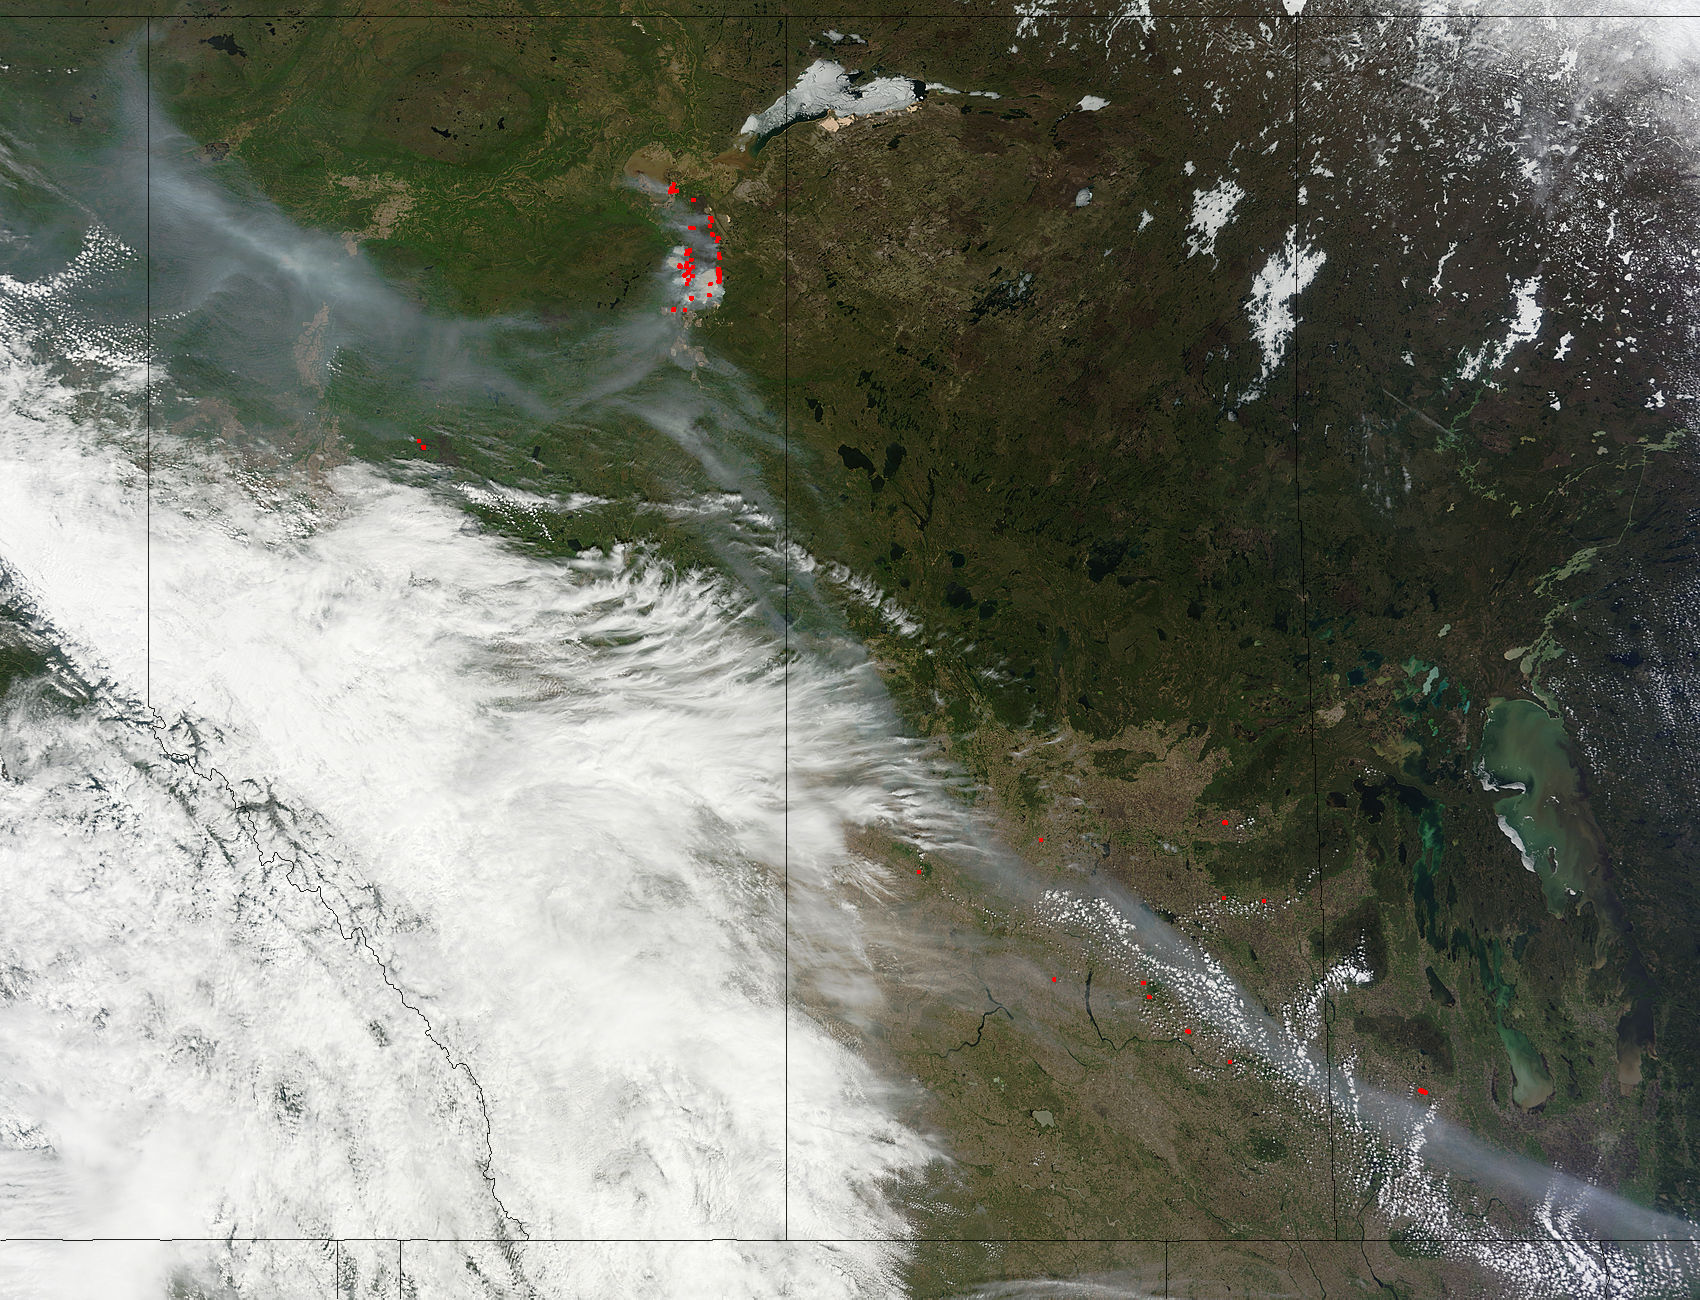 fires-continued-to-burn-in-northern-alberta-canada